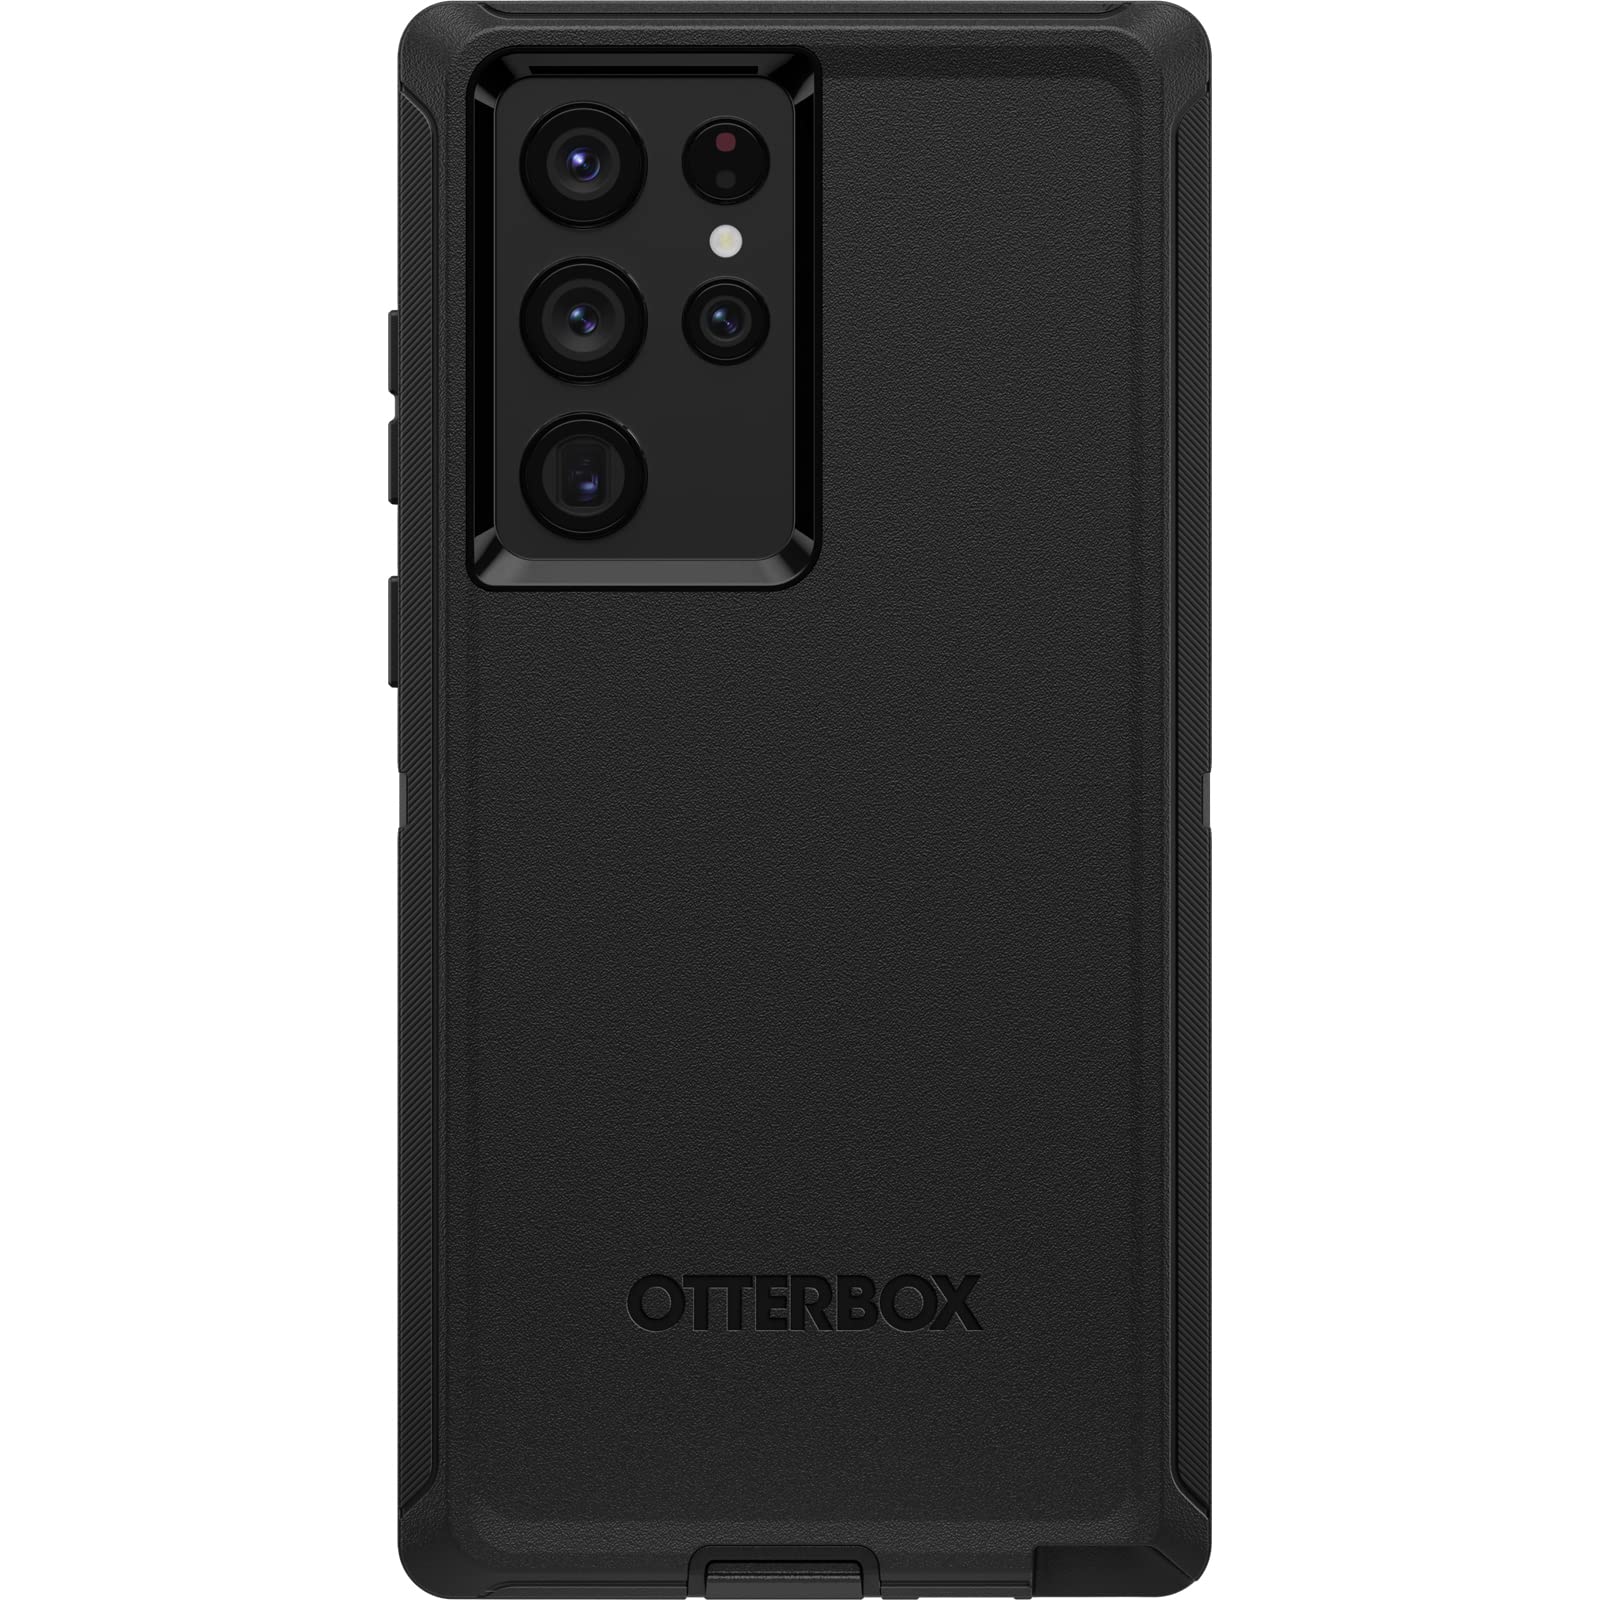 OtterBox Defender Case for Galaxy S22 Ultra, Shockproof, Drop Proof, Ultra-Rugged, Protective Case, 4x Tested to Military Standard, Black, No Retail Packaging